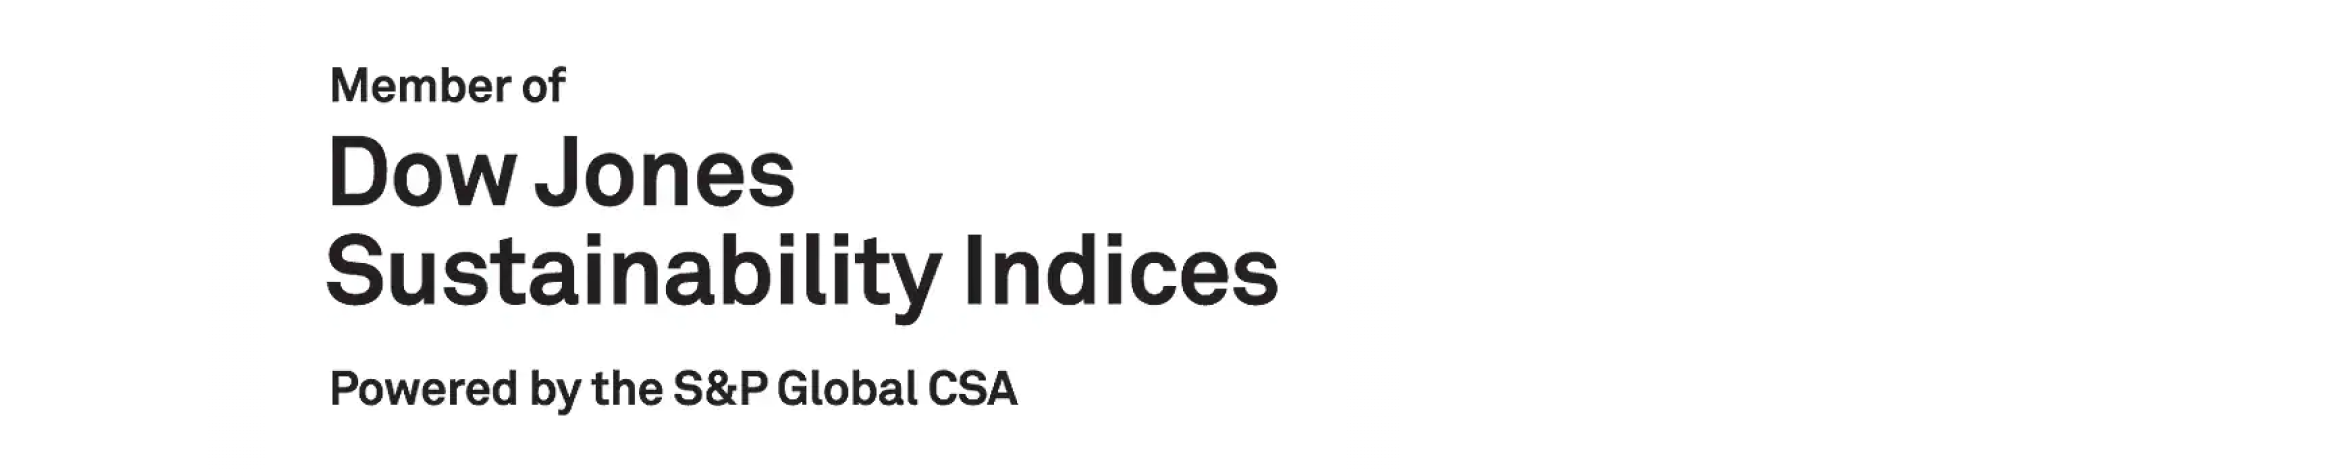 Member of Dow Jones Sustainability Indices, powered by the S&P Global CSA logo